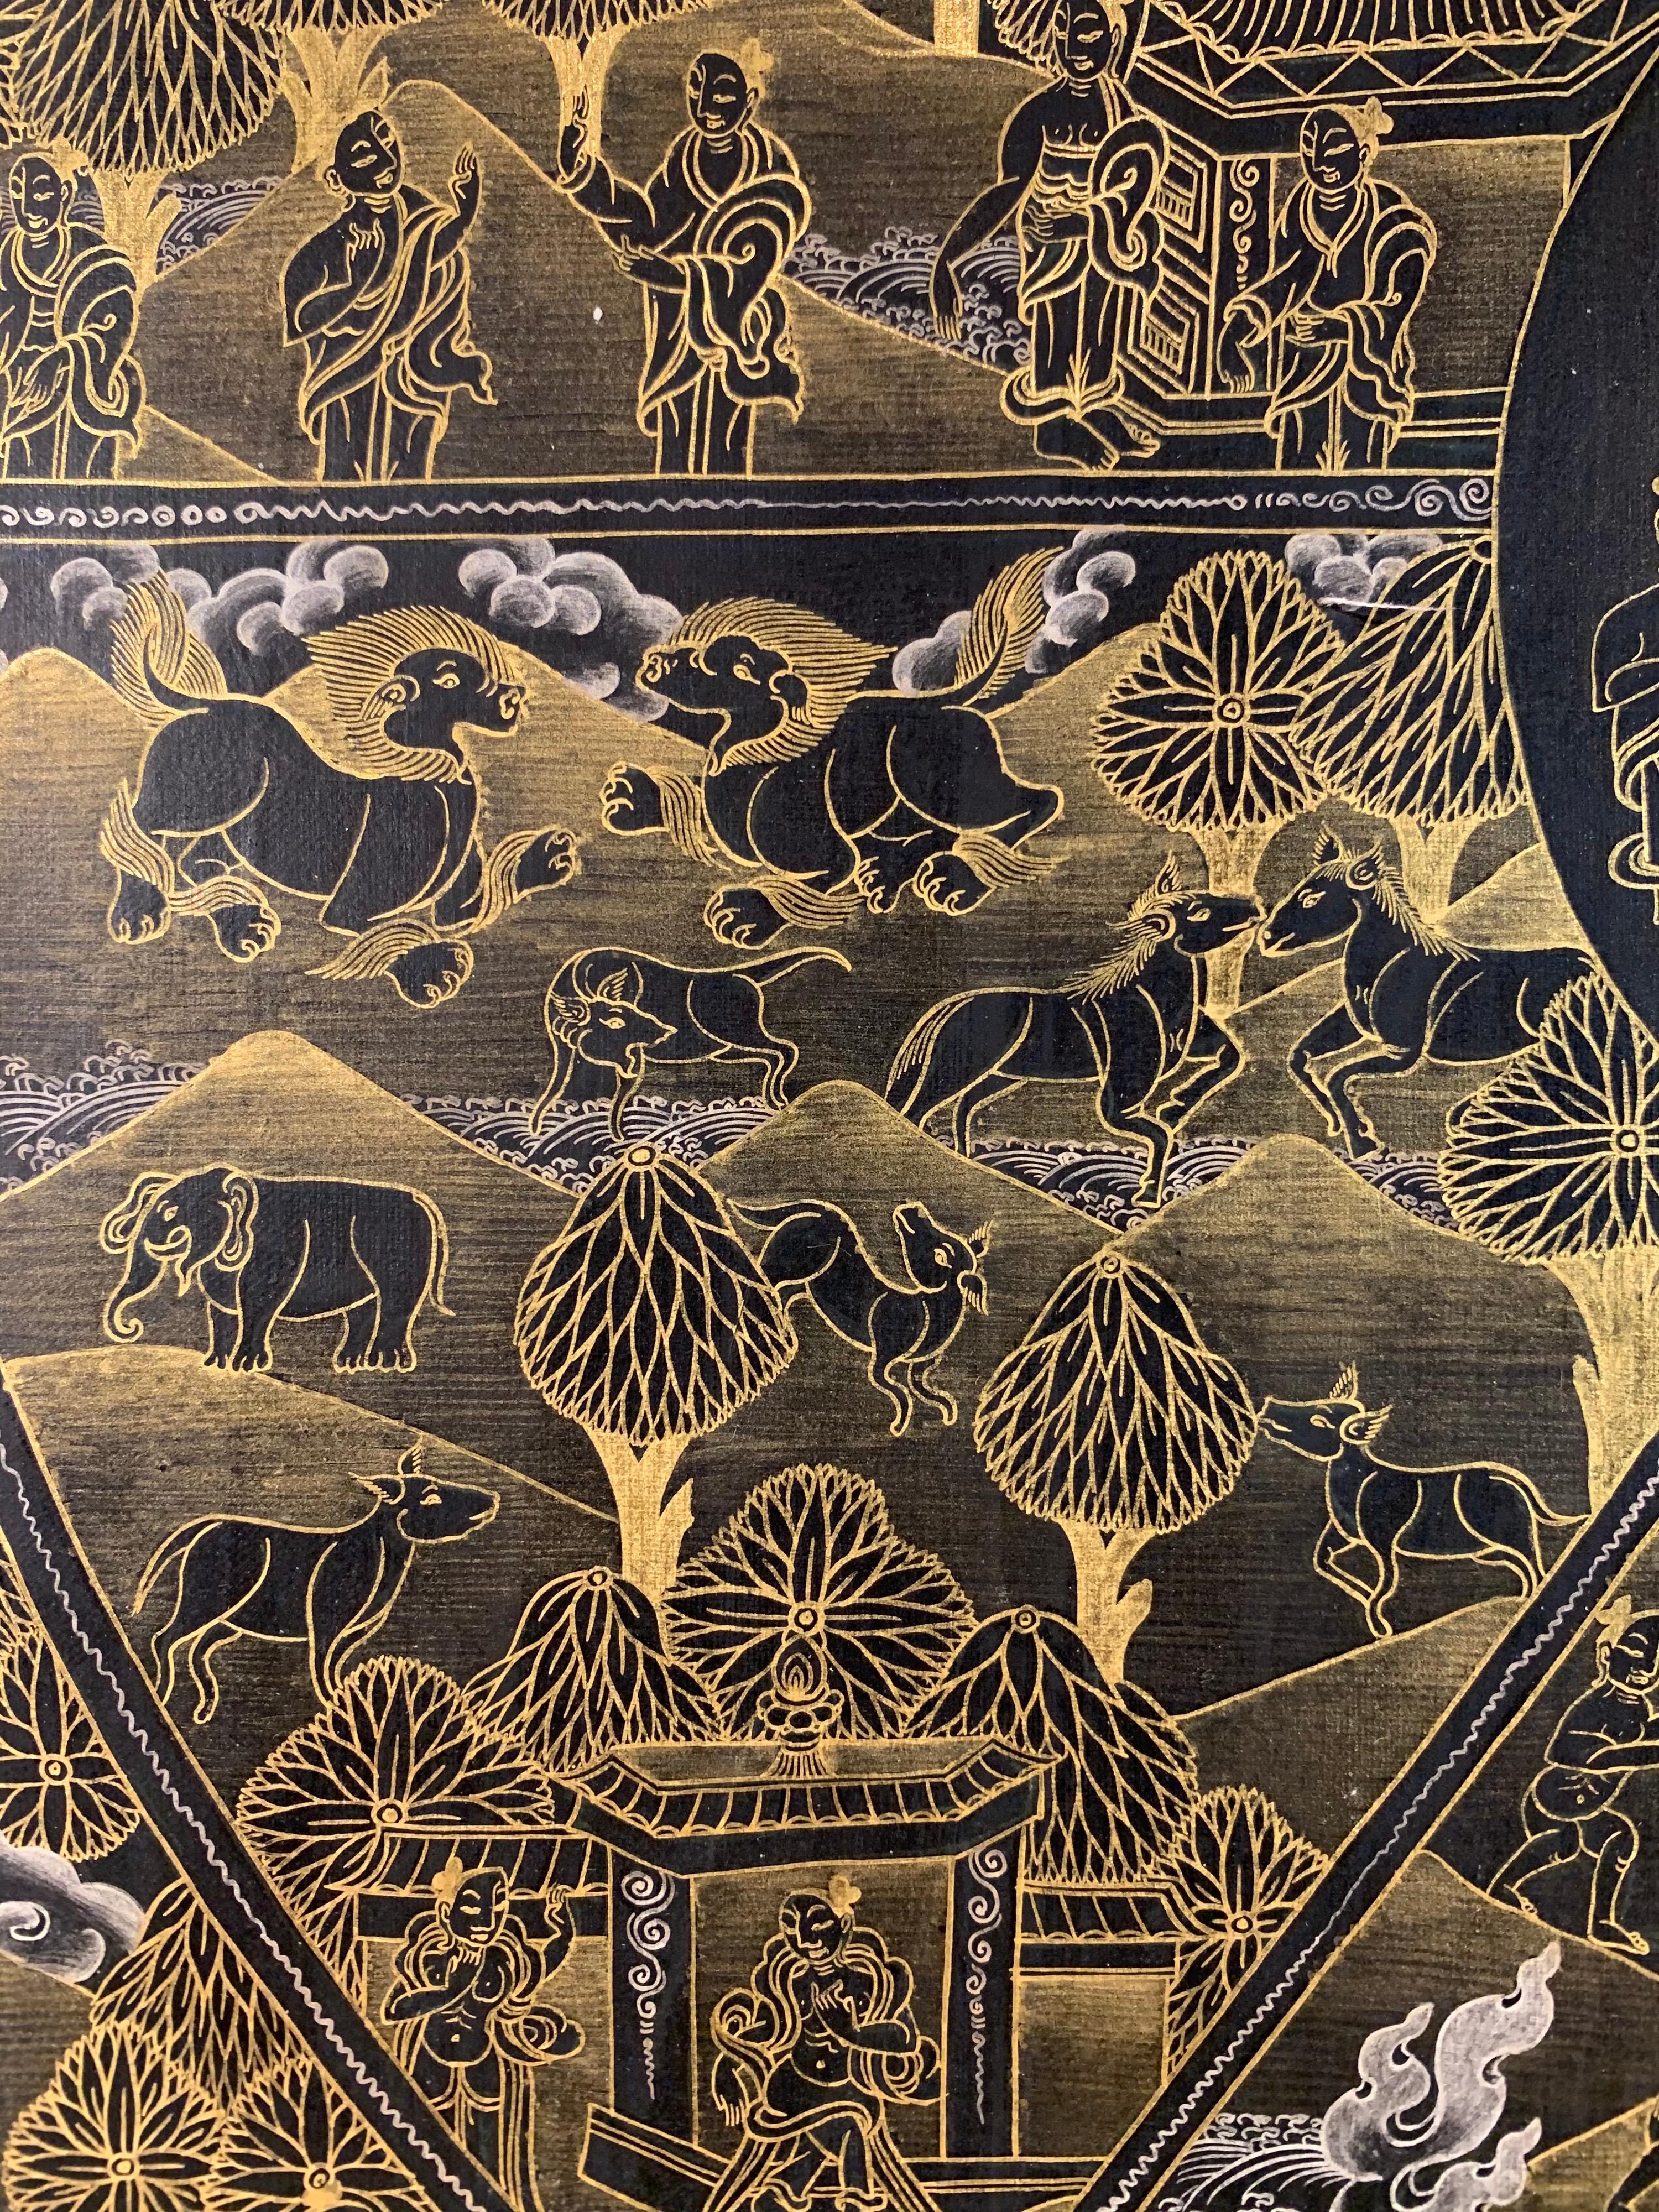 Hand Painted Wheel of Life Original Thangka on Canvas with 24K Gold - Black Figurative Painting by Unknown